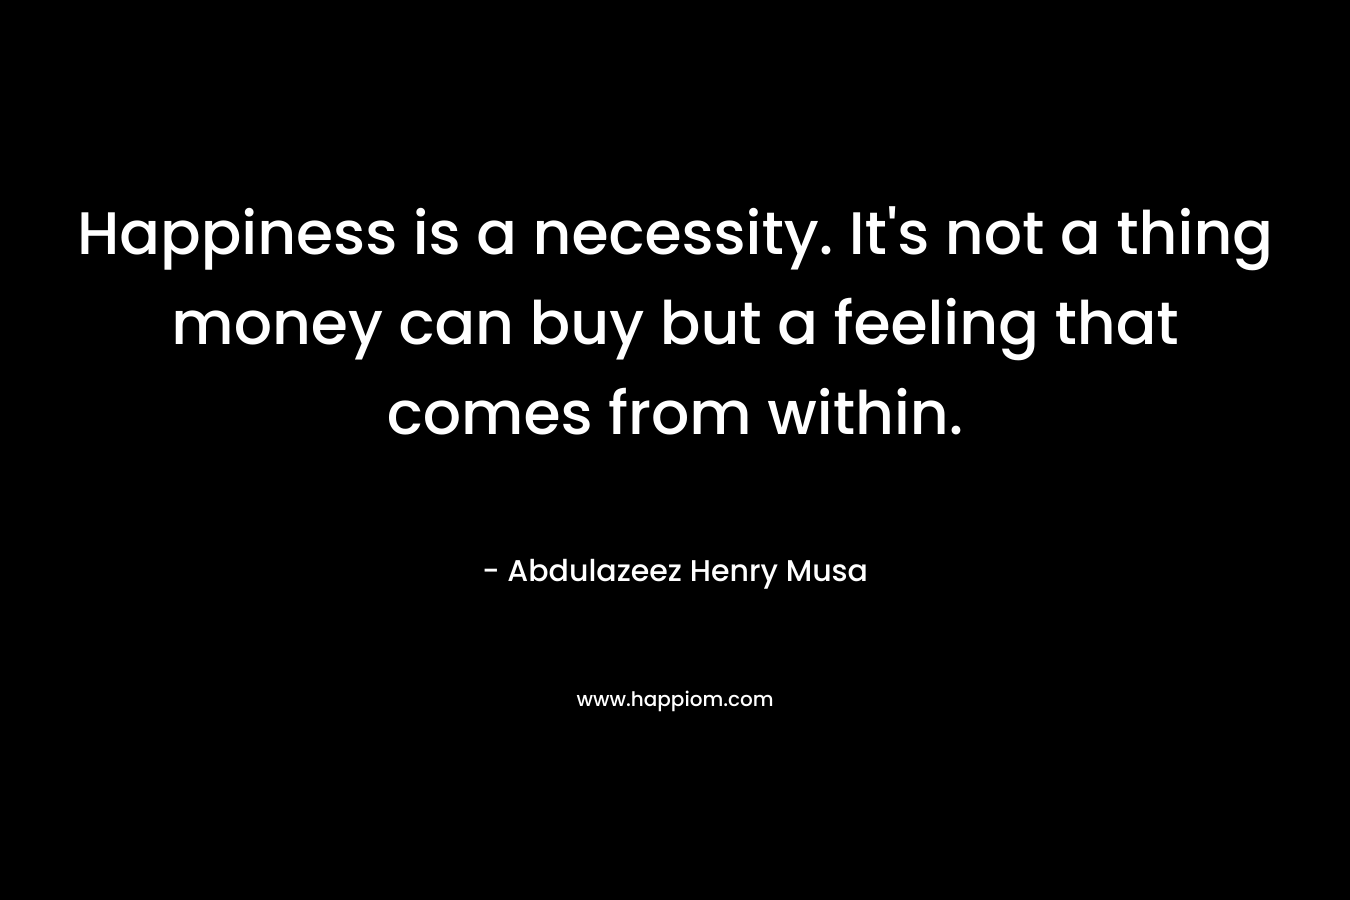 Happiness is a necessity. It's not a thing money can buy but a feeling that comes from within.